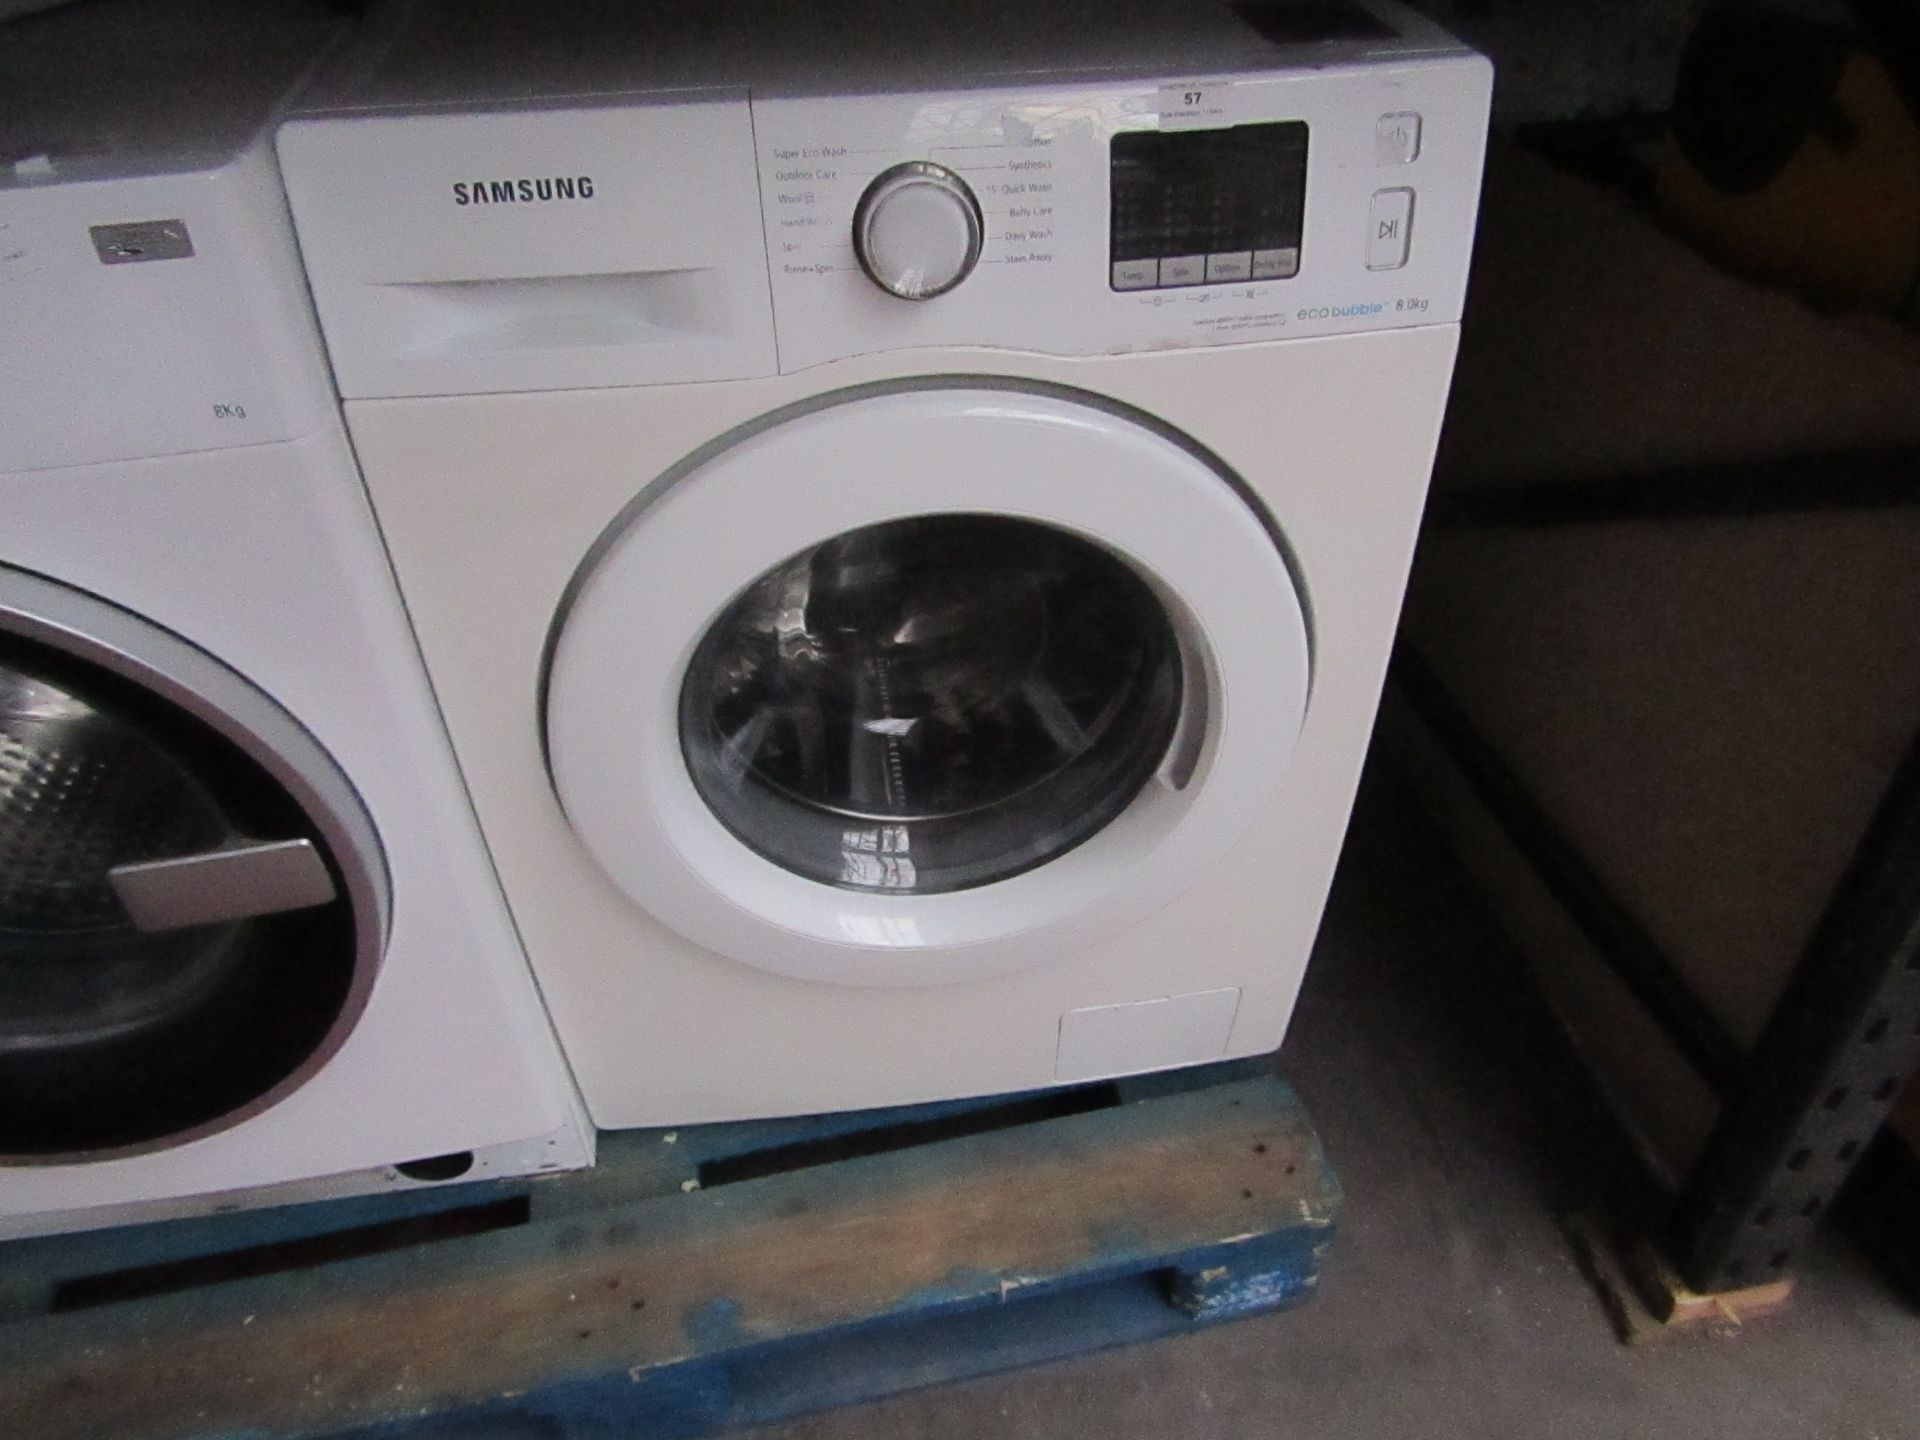 Samsung Eco Bubble 8Kg washing machine, powers on and spins.